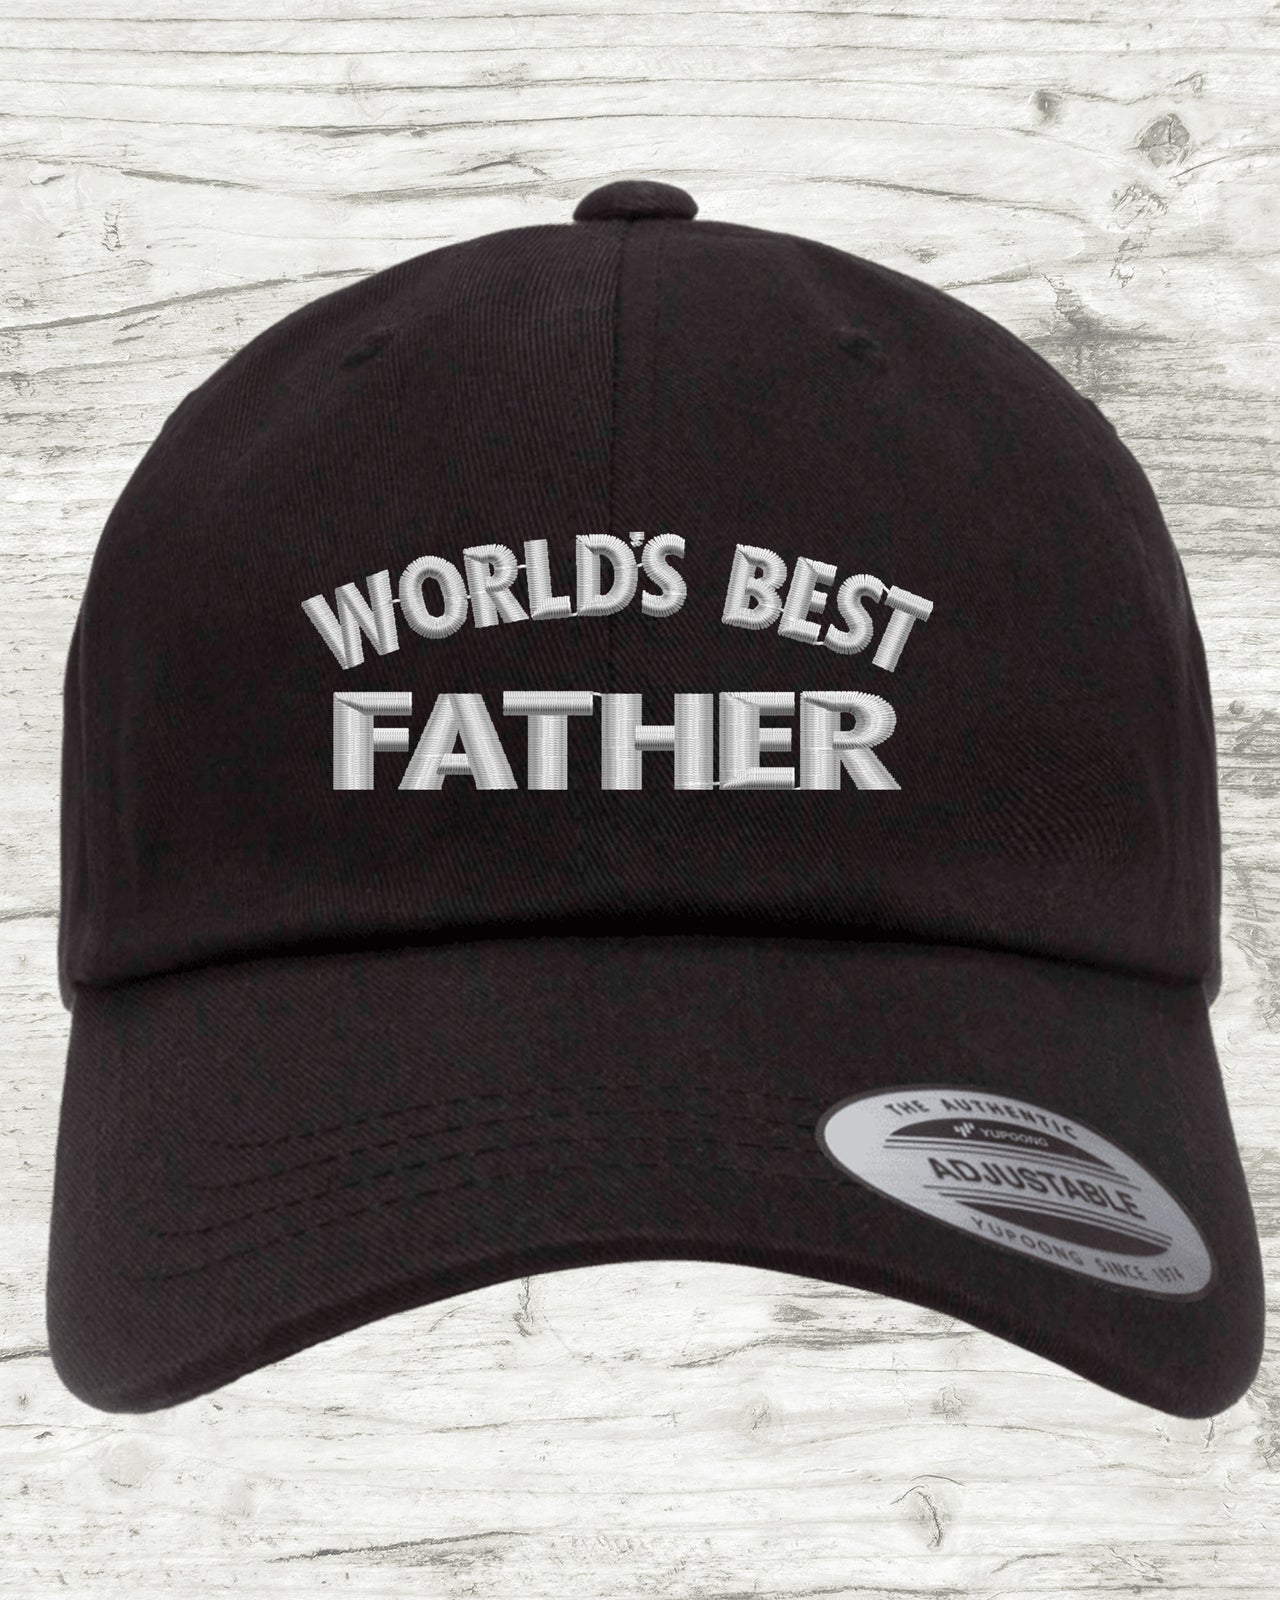 World's Best Father, Dad Hat, Dad Cap, Fathers Day, Hat for Dad, Father's Day, Dad Gift, Gift for Dad, Daddy hat, Father, Embroidered Hat